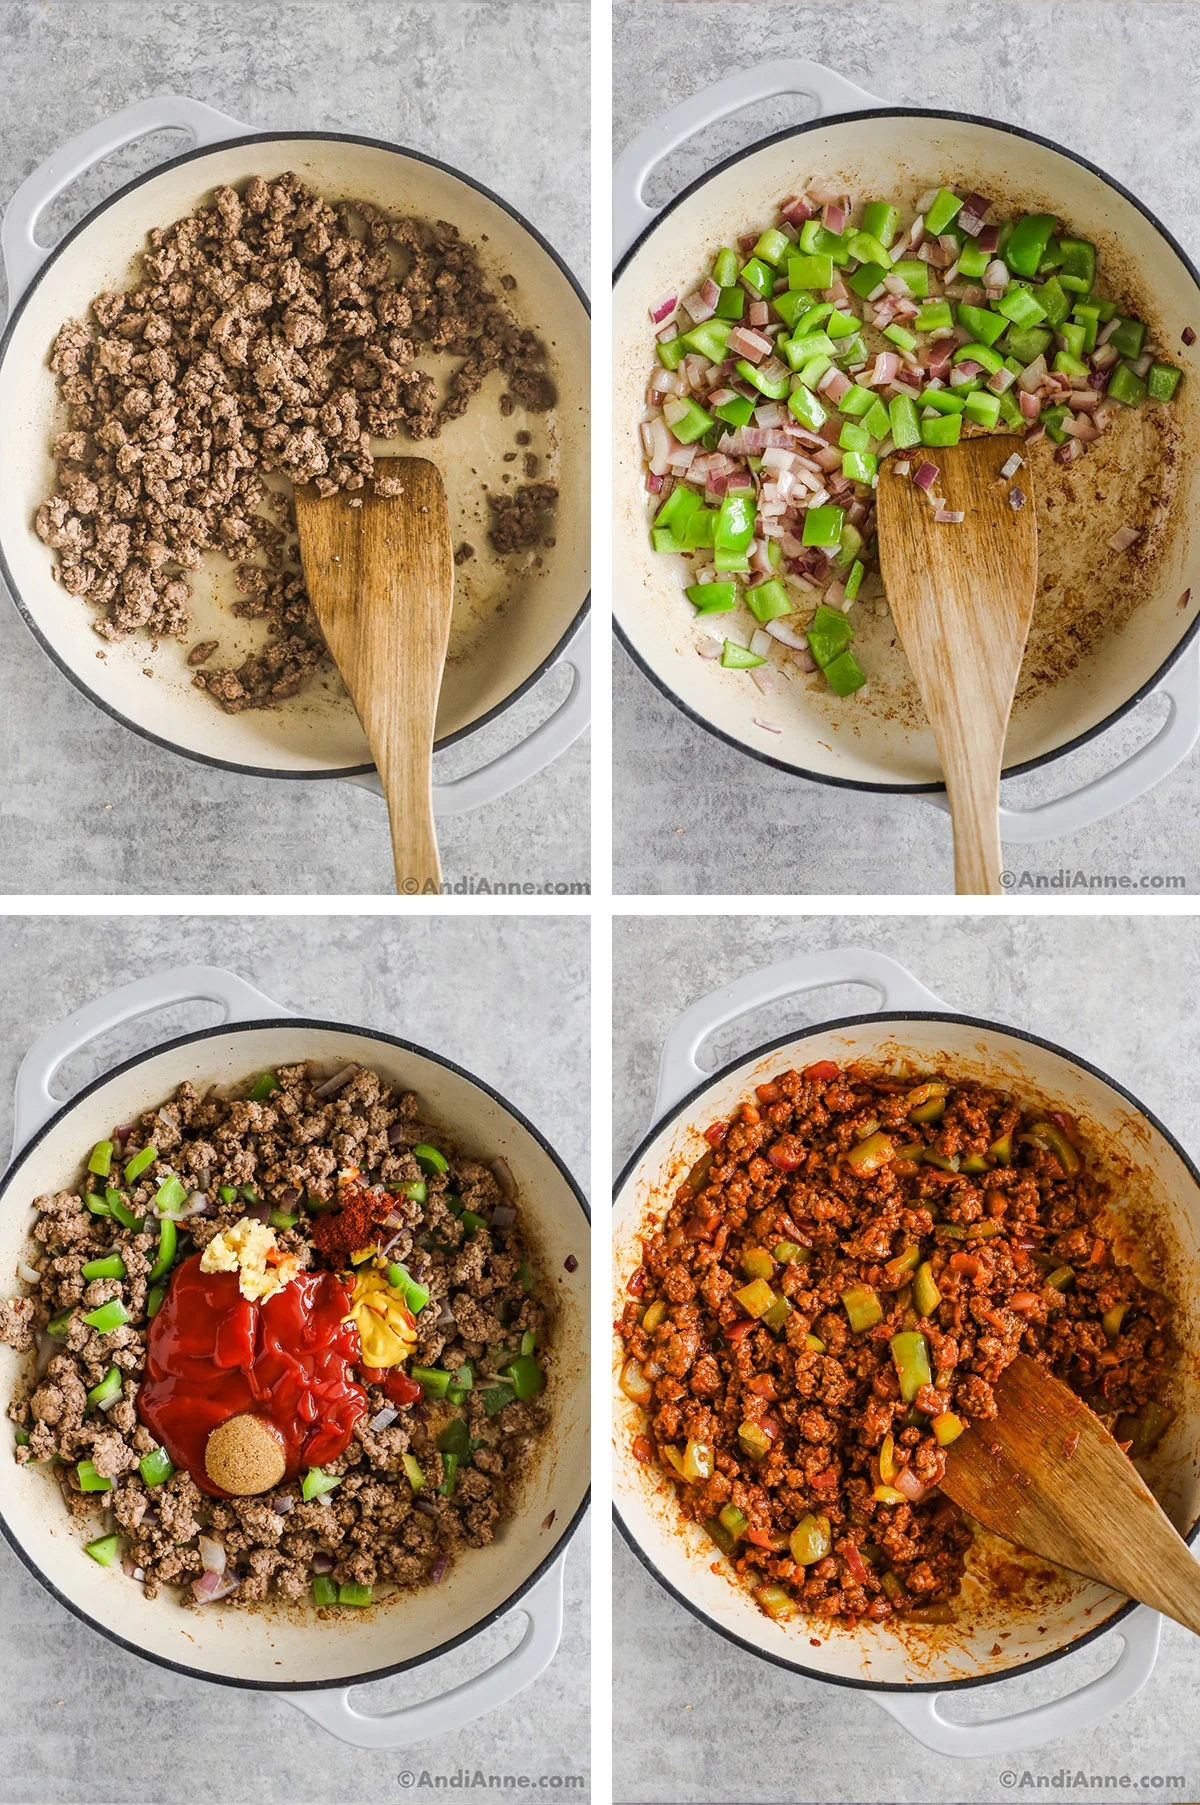 Four images of pan cooking ingredients for the recipe in steps. Including browning ground beef, sauteeing vegetables, Adding sauce ingredients, and final cooked sloppy joe mixture.